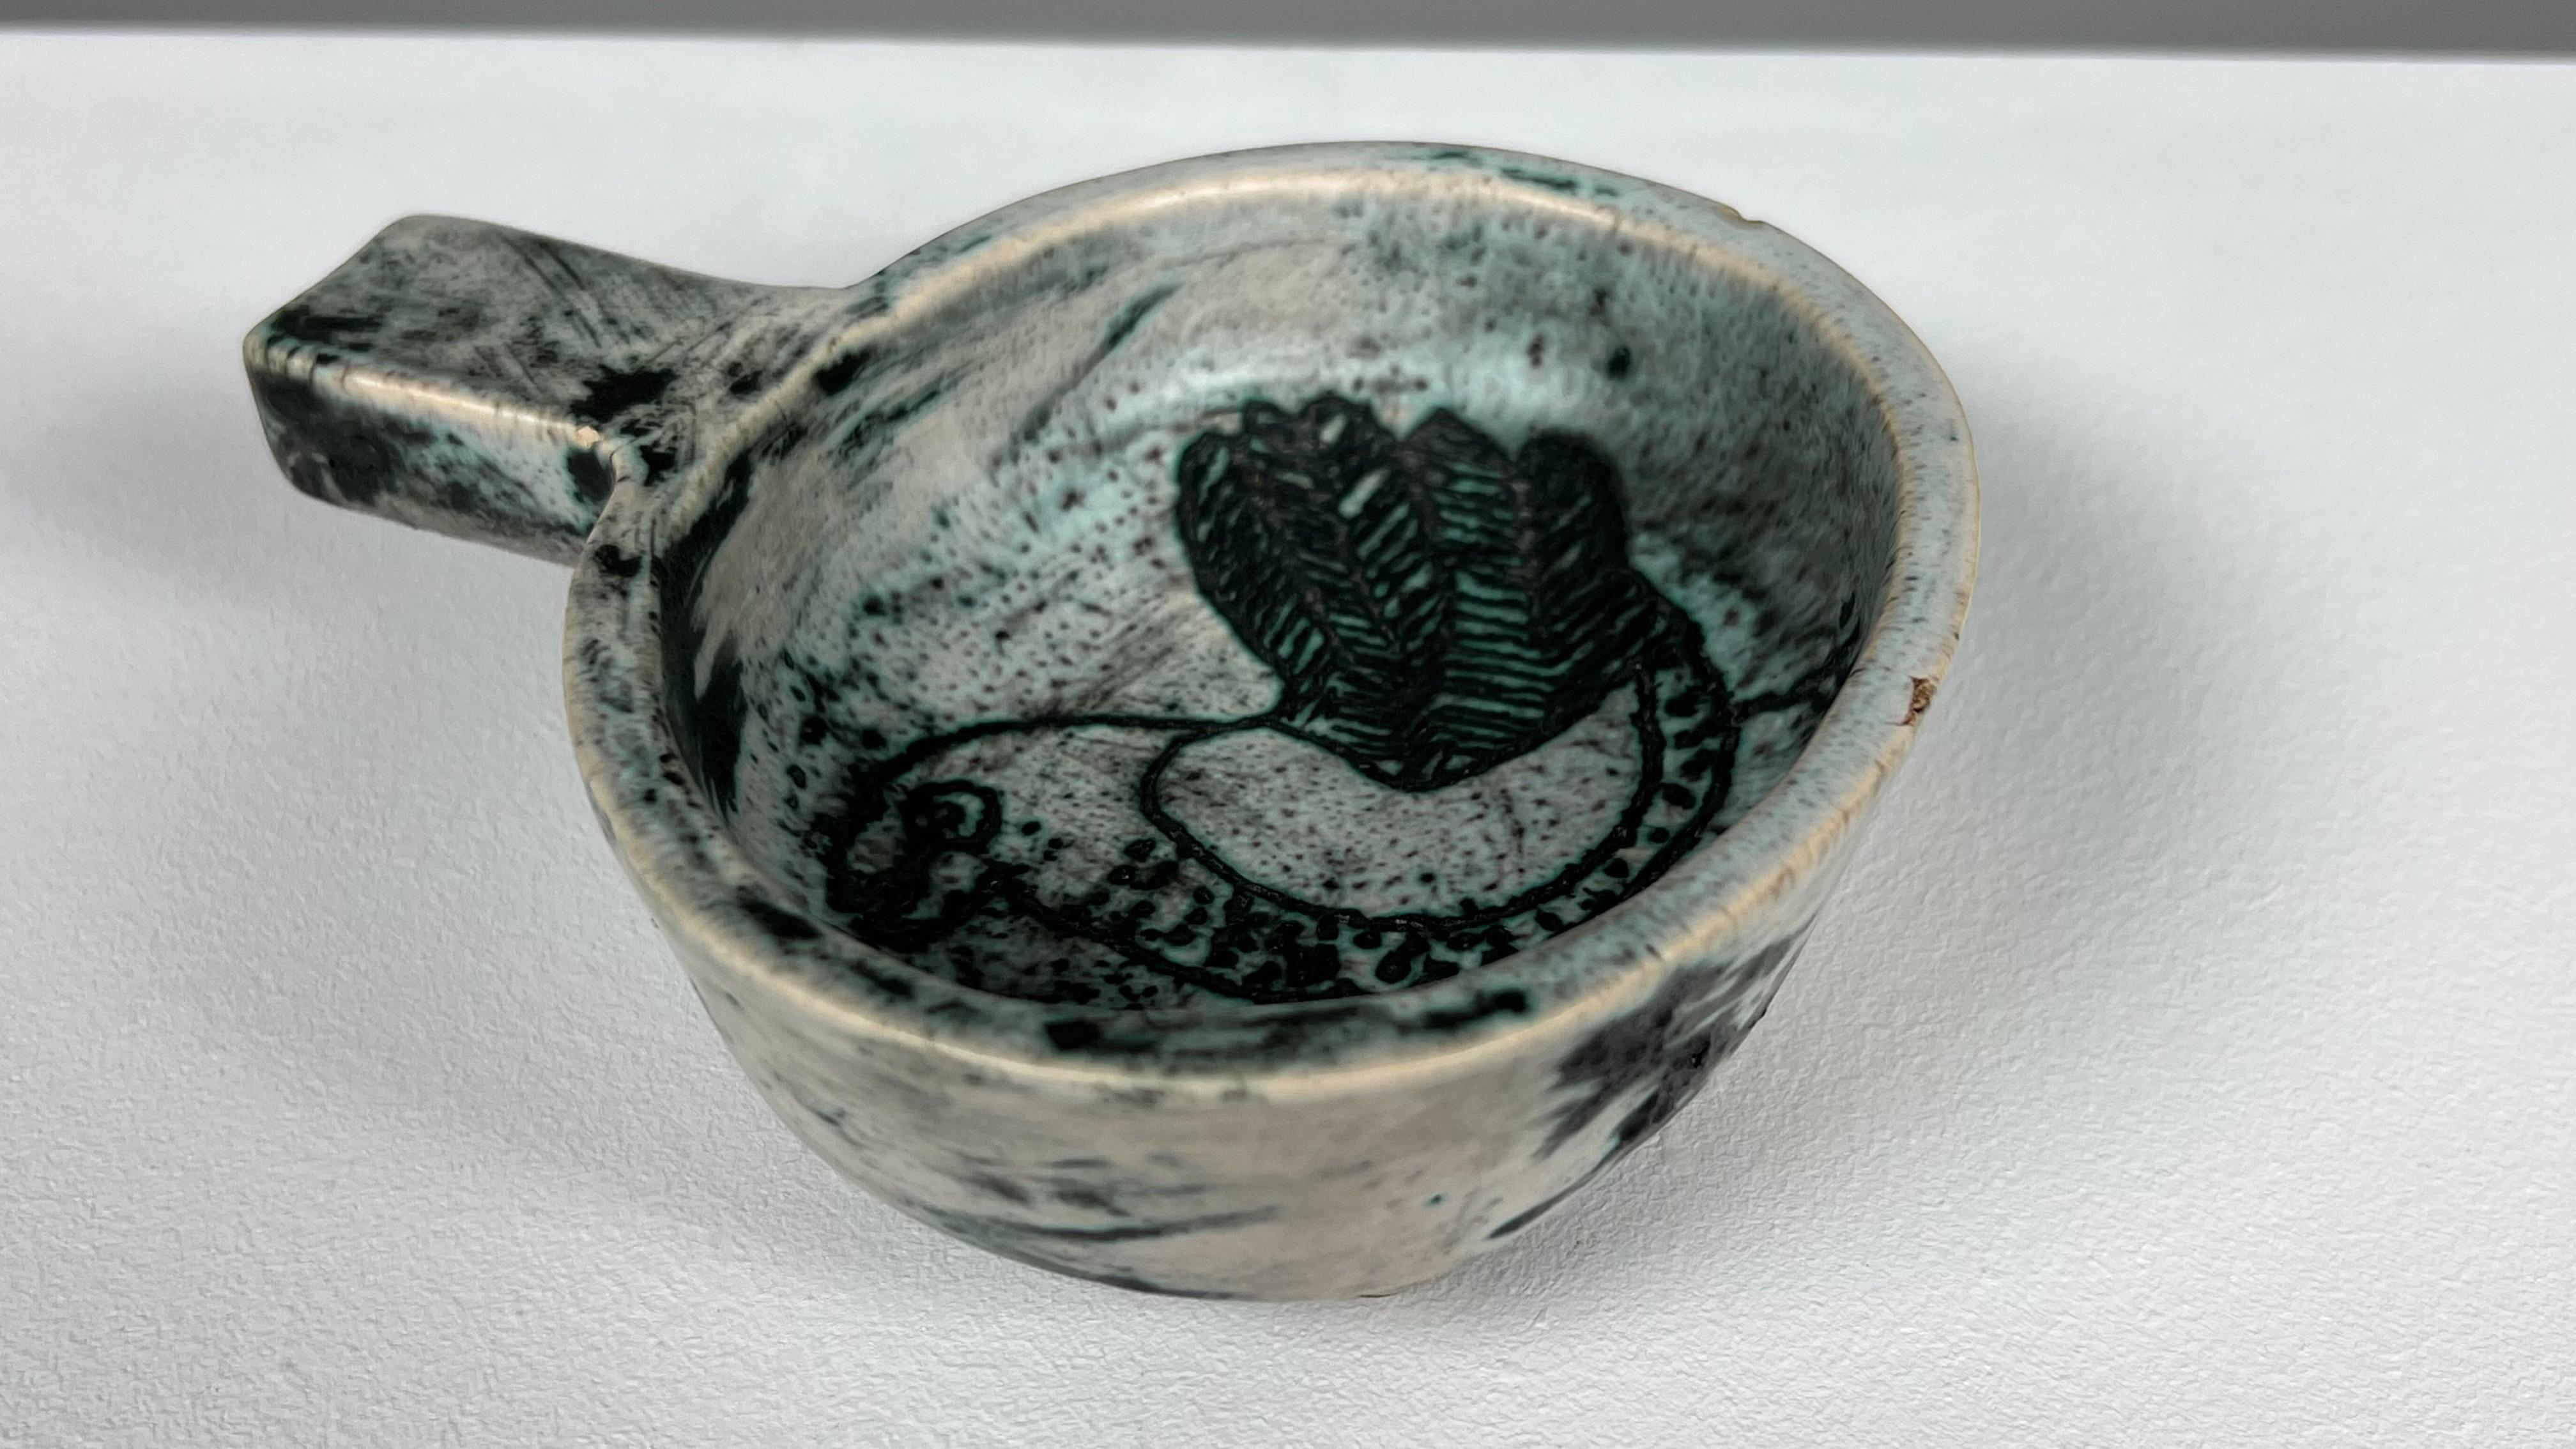 Very rare ceramic bowl or vide-poche with bird motif by French artist Jaques Blin from the 1950s.

Jacques Blin was born in France in 1920. He earned a degree in engineering, but decided to make a living from his passion. So, in 1954, he founded